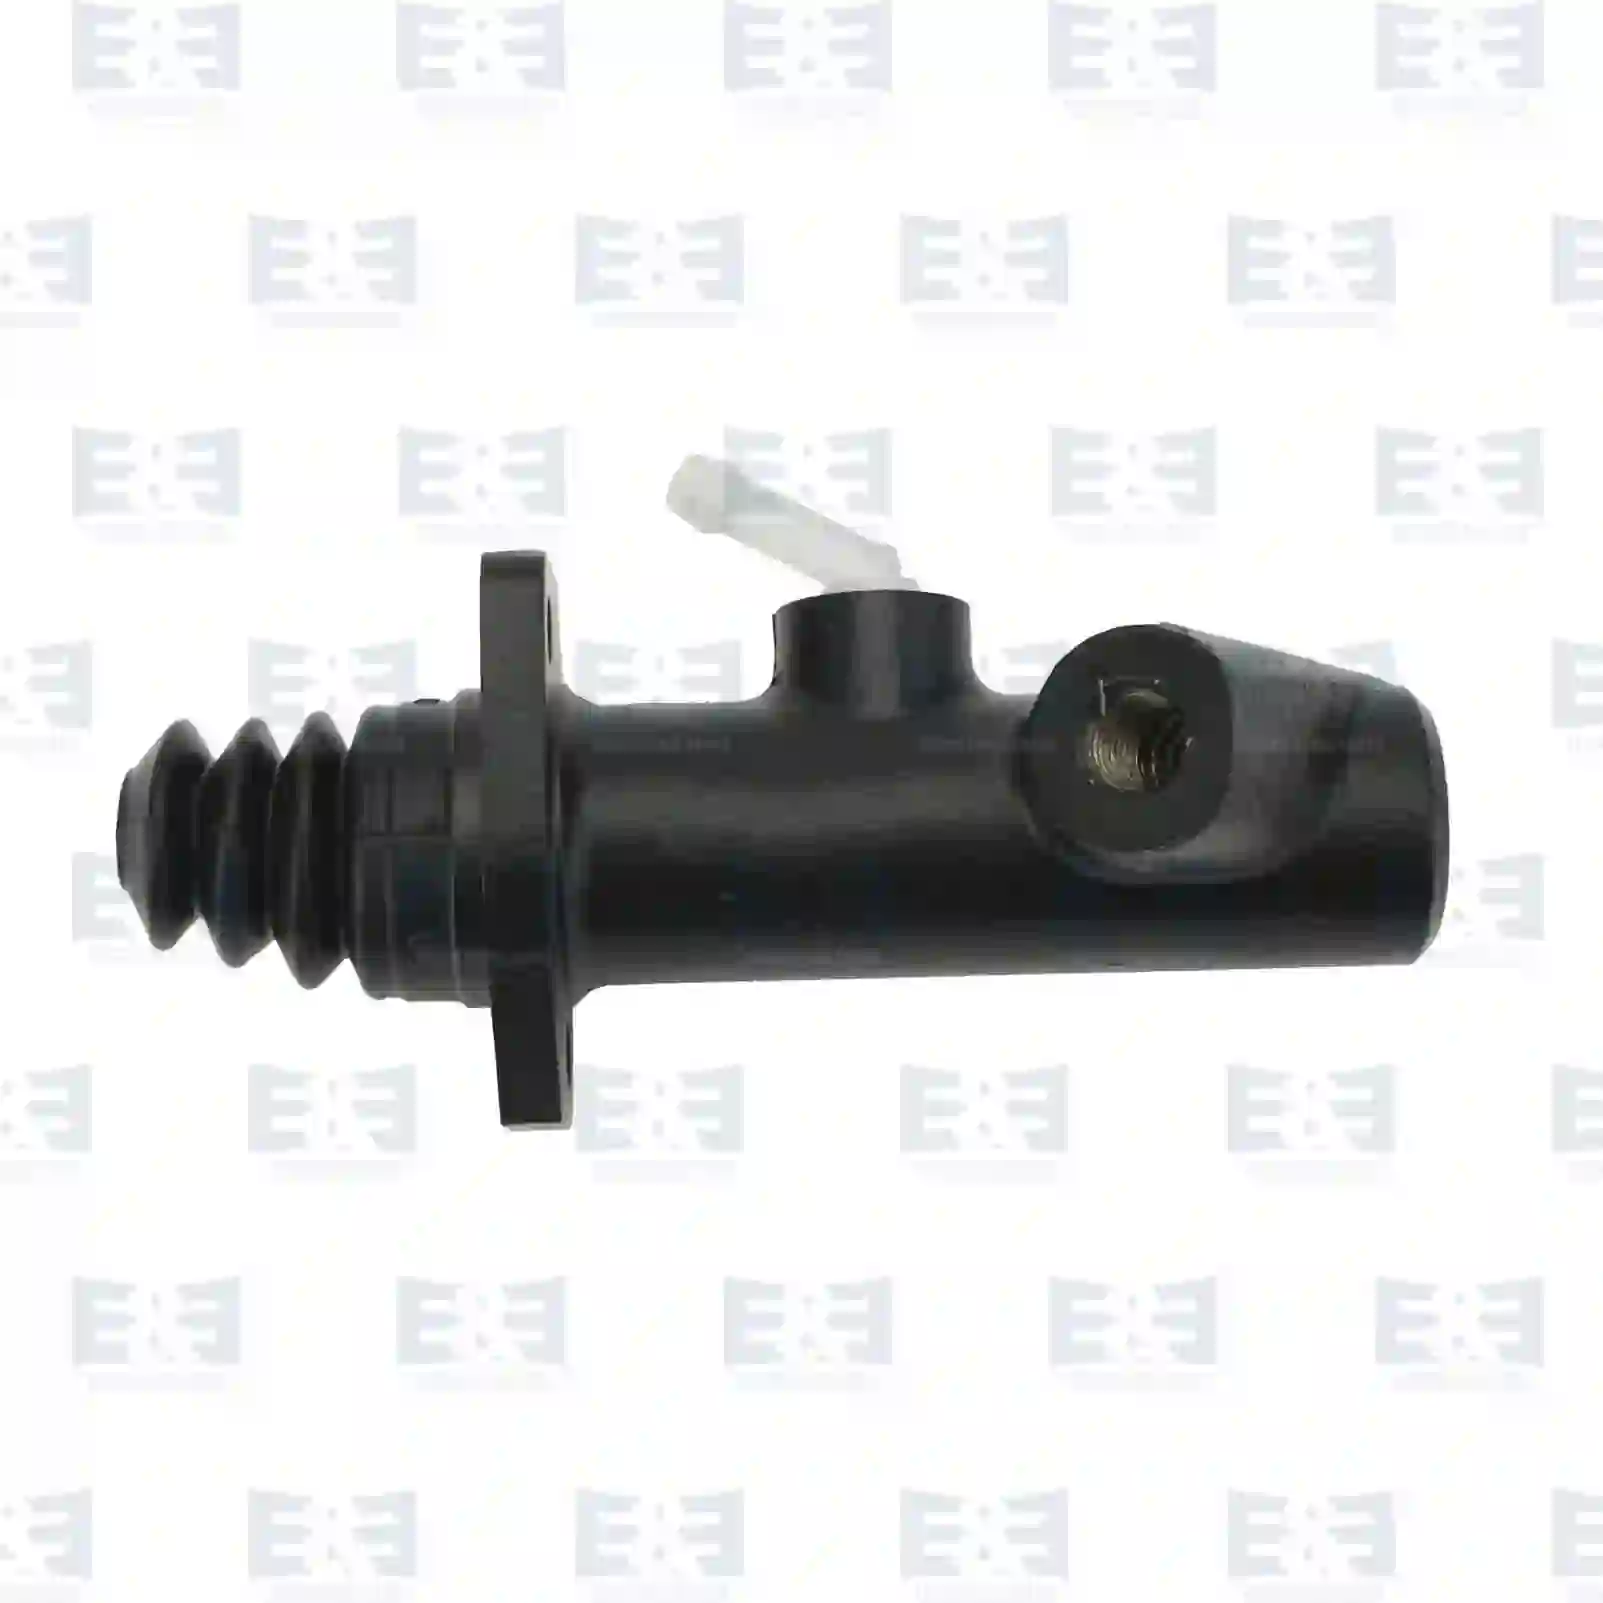 Clutch Cylinder Clutch cylinder, EE No 2E2289144 ,  oem no:6013003030001, 81307156065, 81307156077, 81307156115, 5000809514 E&E Truck Spare Parts | Truck Spare Parts, Auotomotive Spare Parts